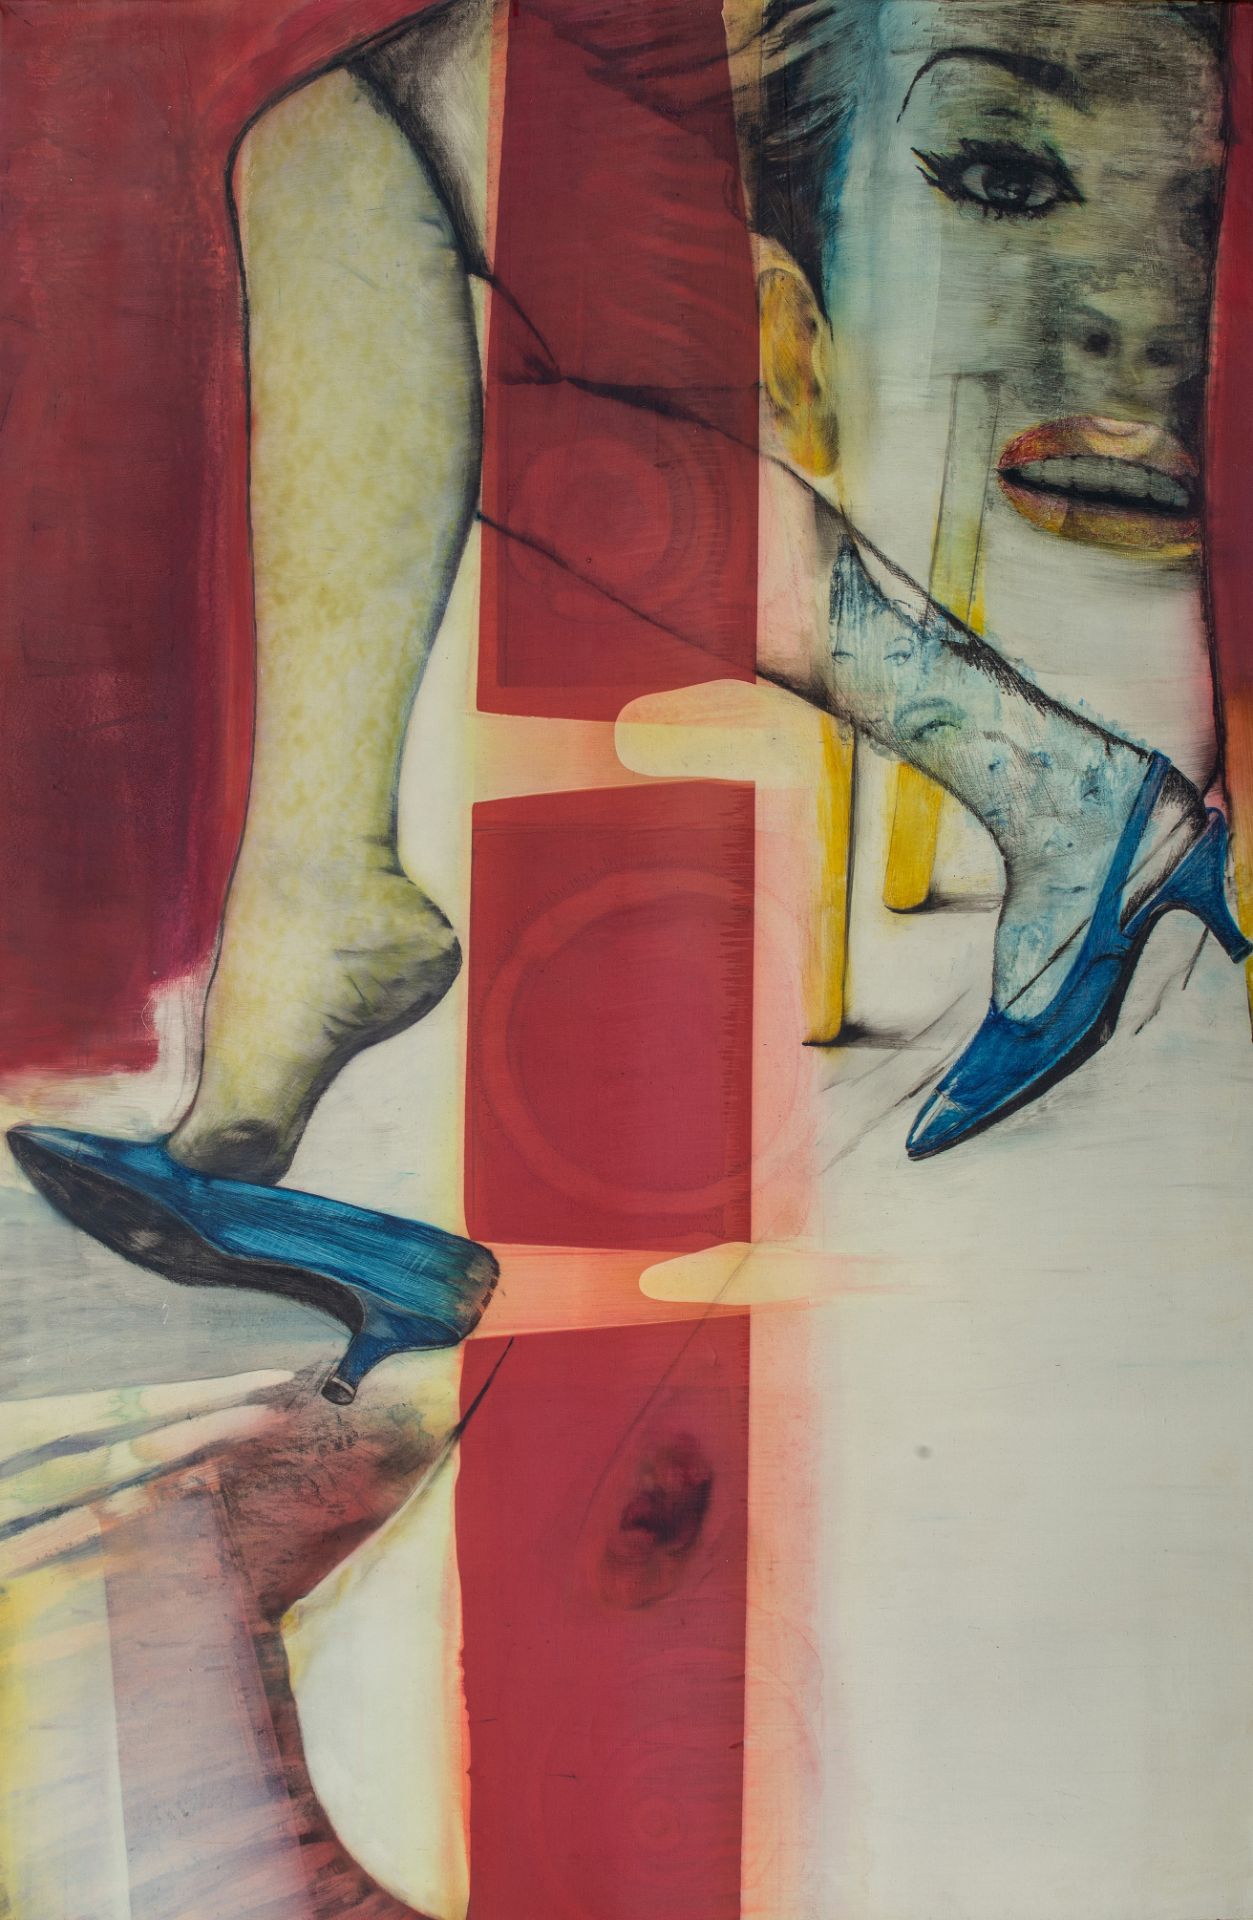 Pol Mara (1920-1998), 'New Shoe', 1965, crayon and oil on canvas, 130 x 195 cm